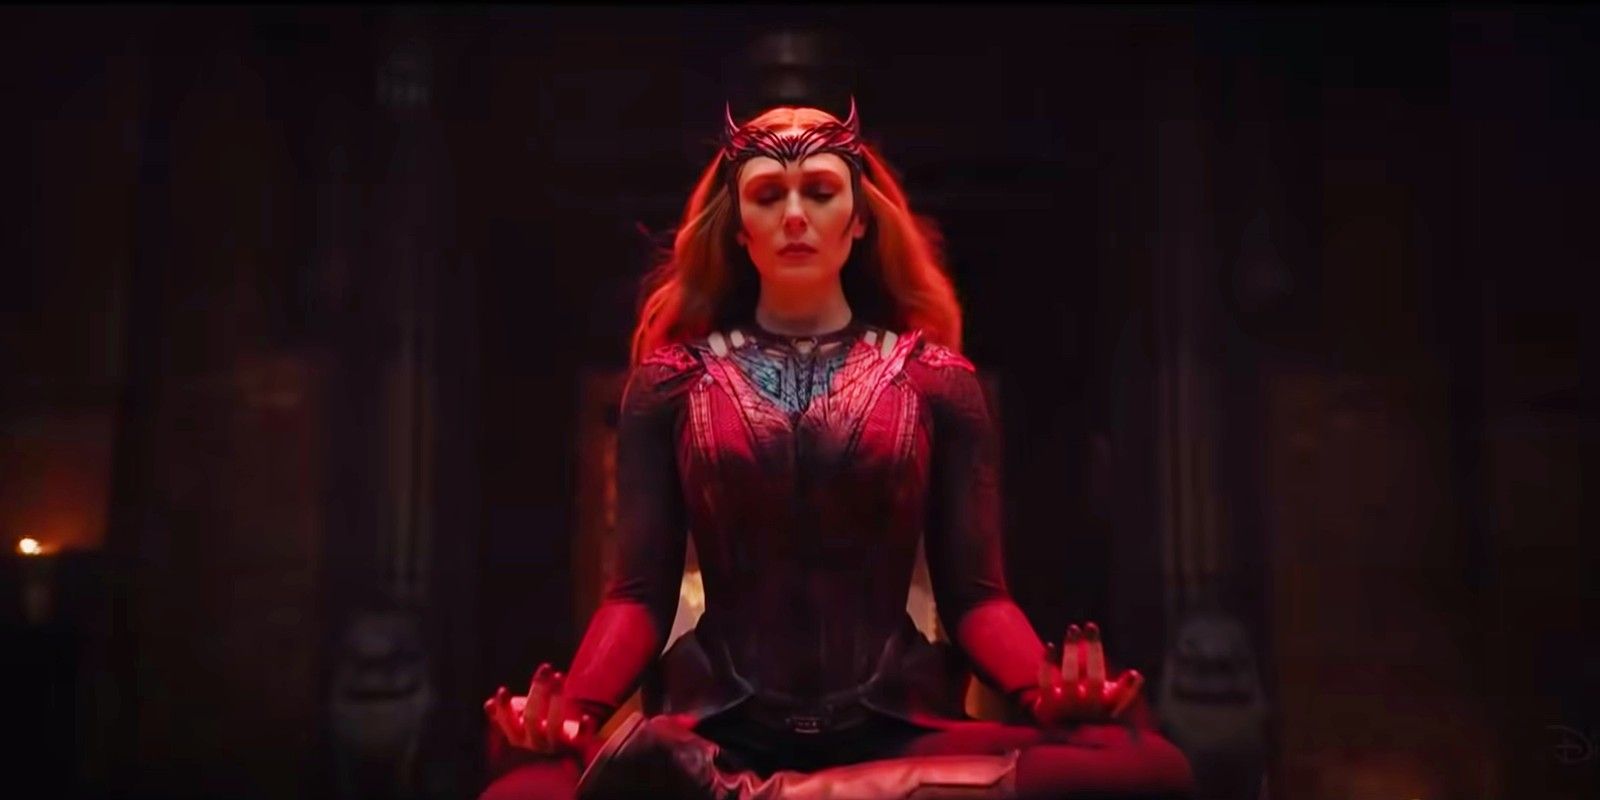 The Scarlet Witch meditating in Doctor Strange in the Multiverse of Madness.